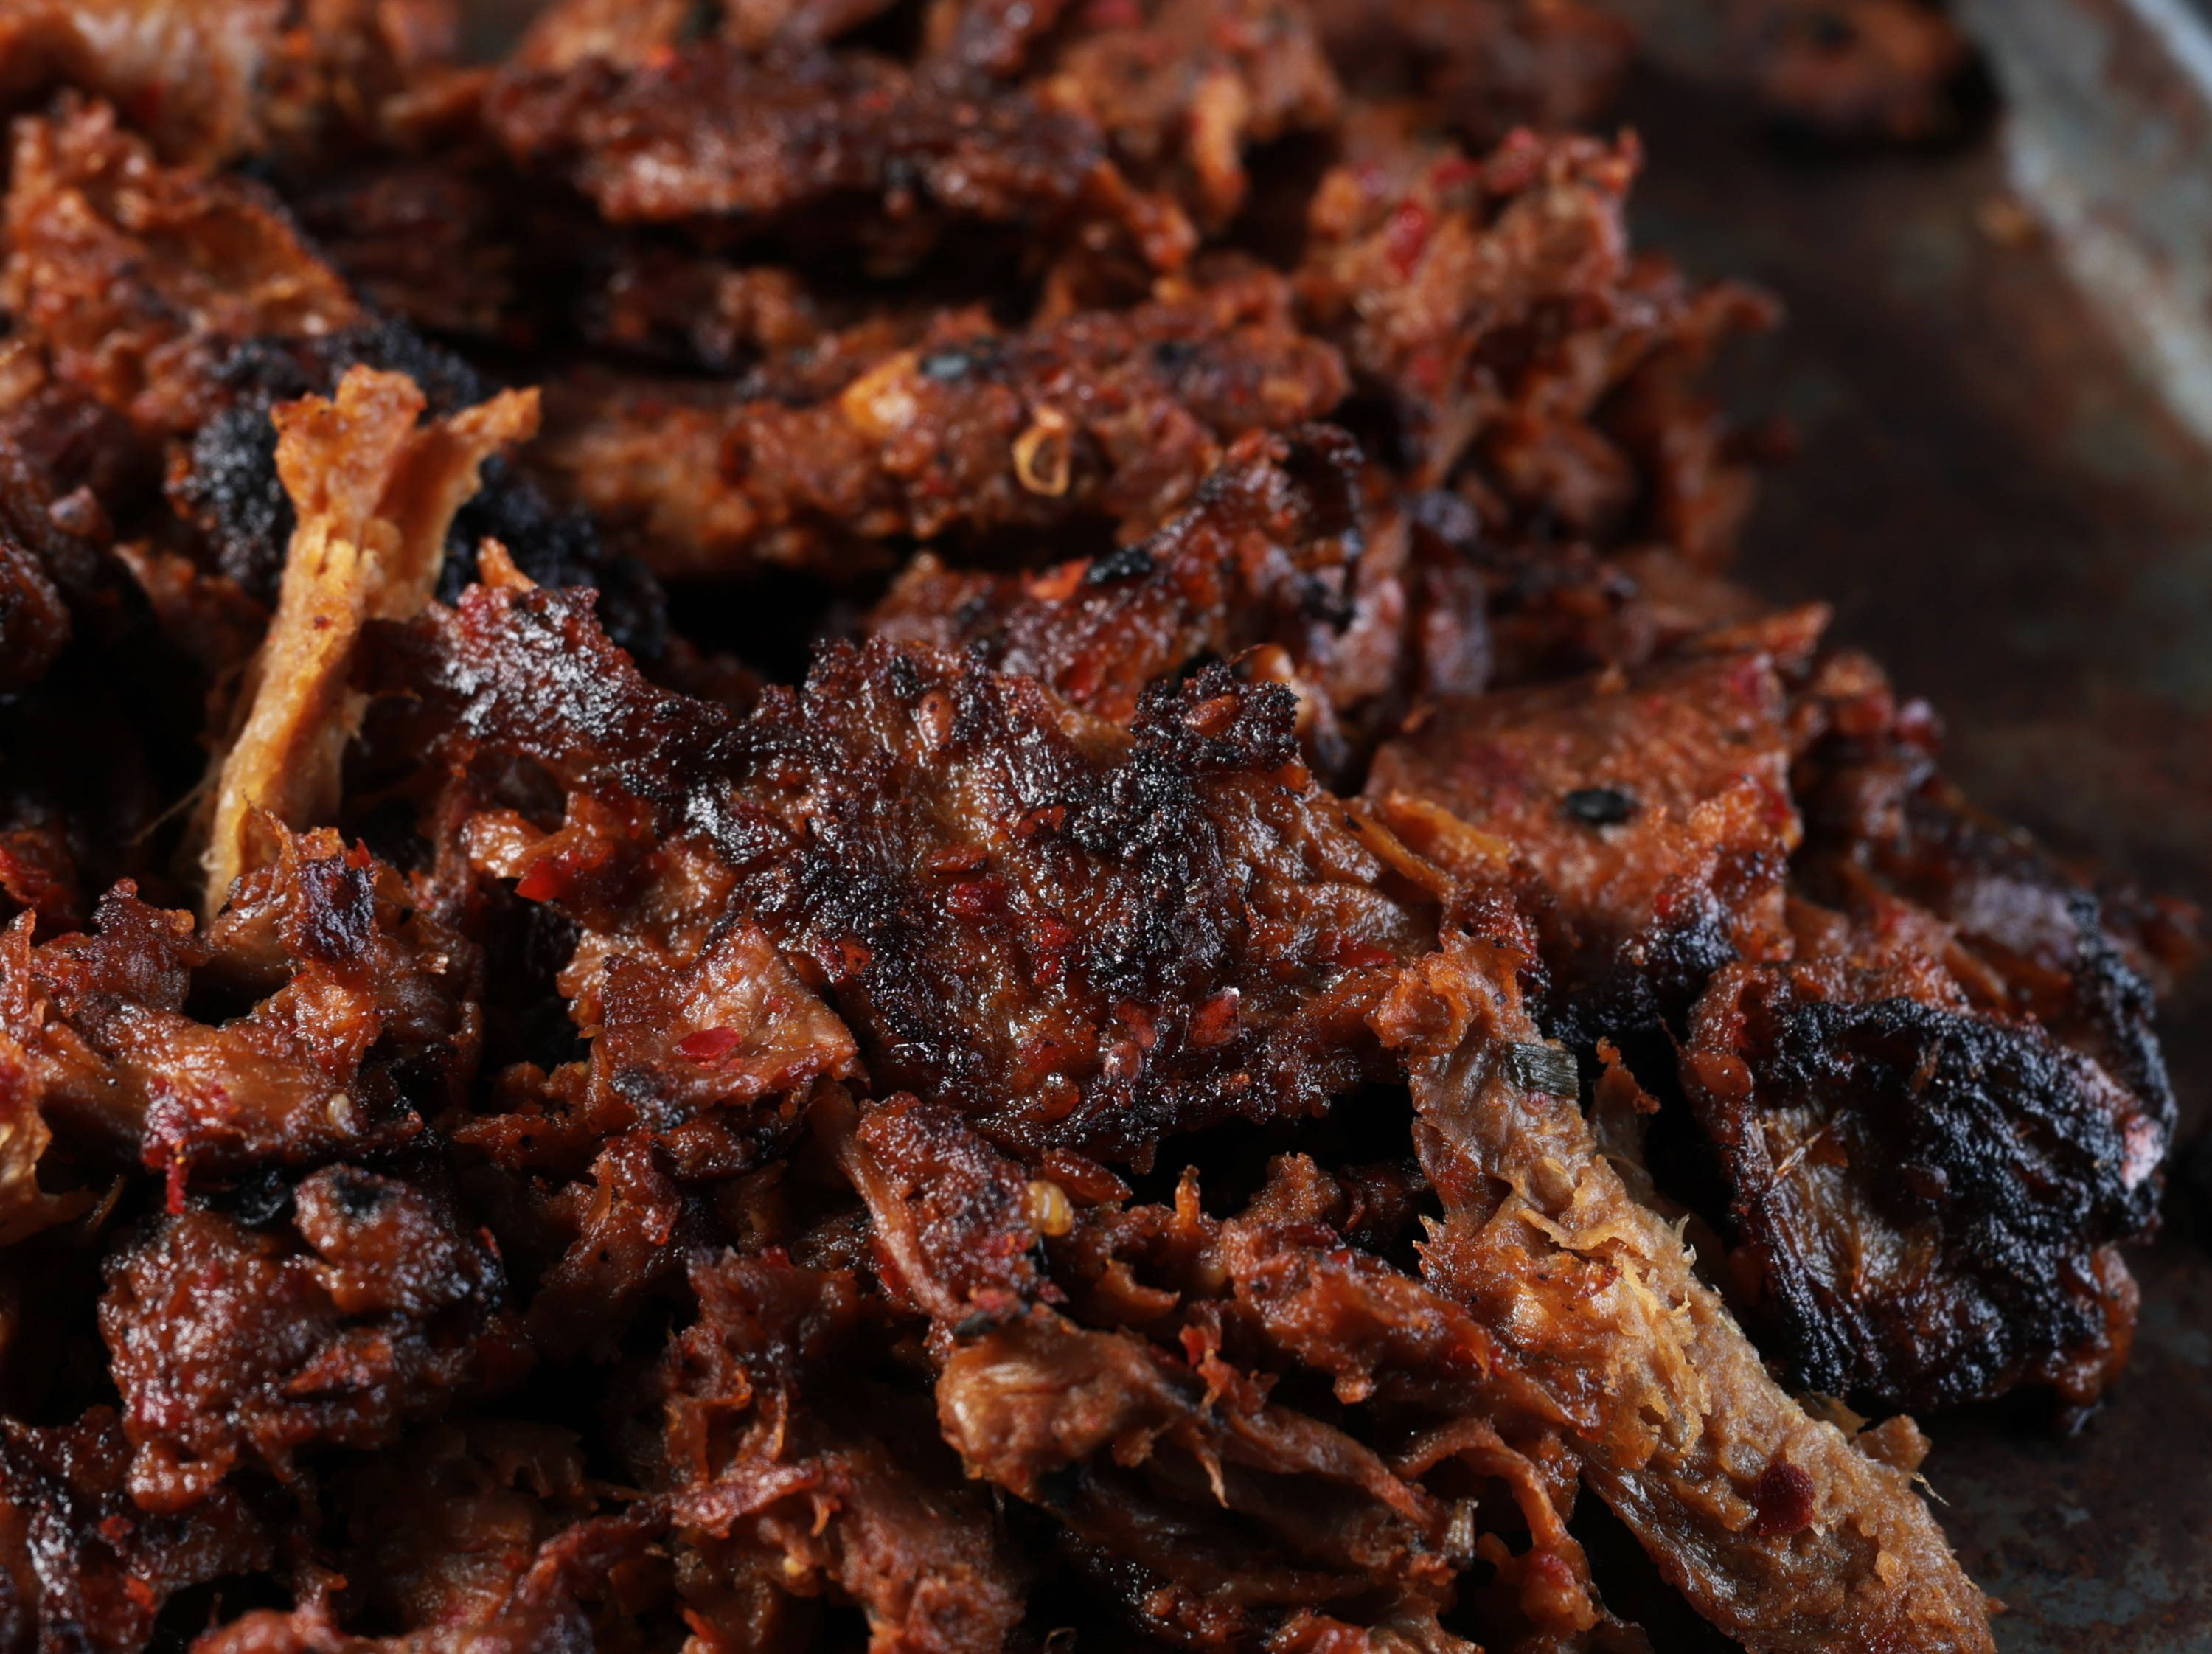 Close up of Harvest Shreds resembling shredded meat, with bits of char